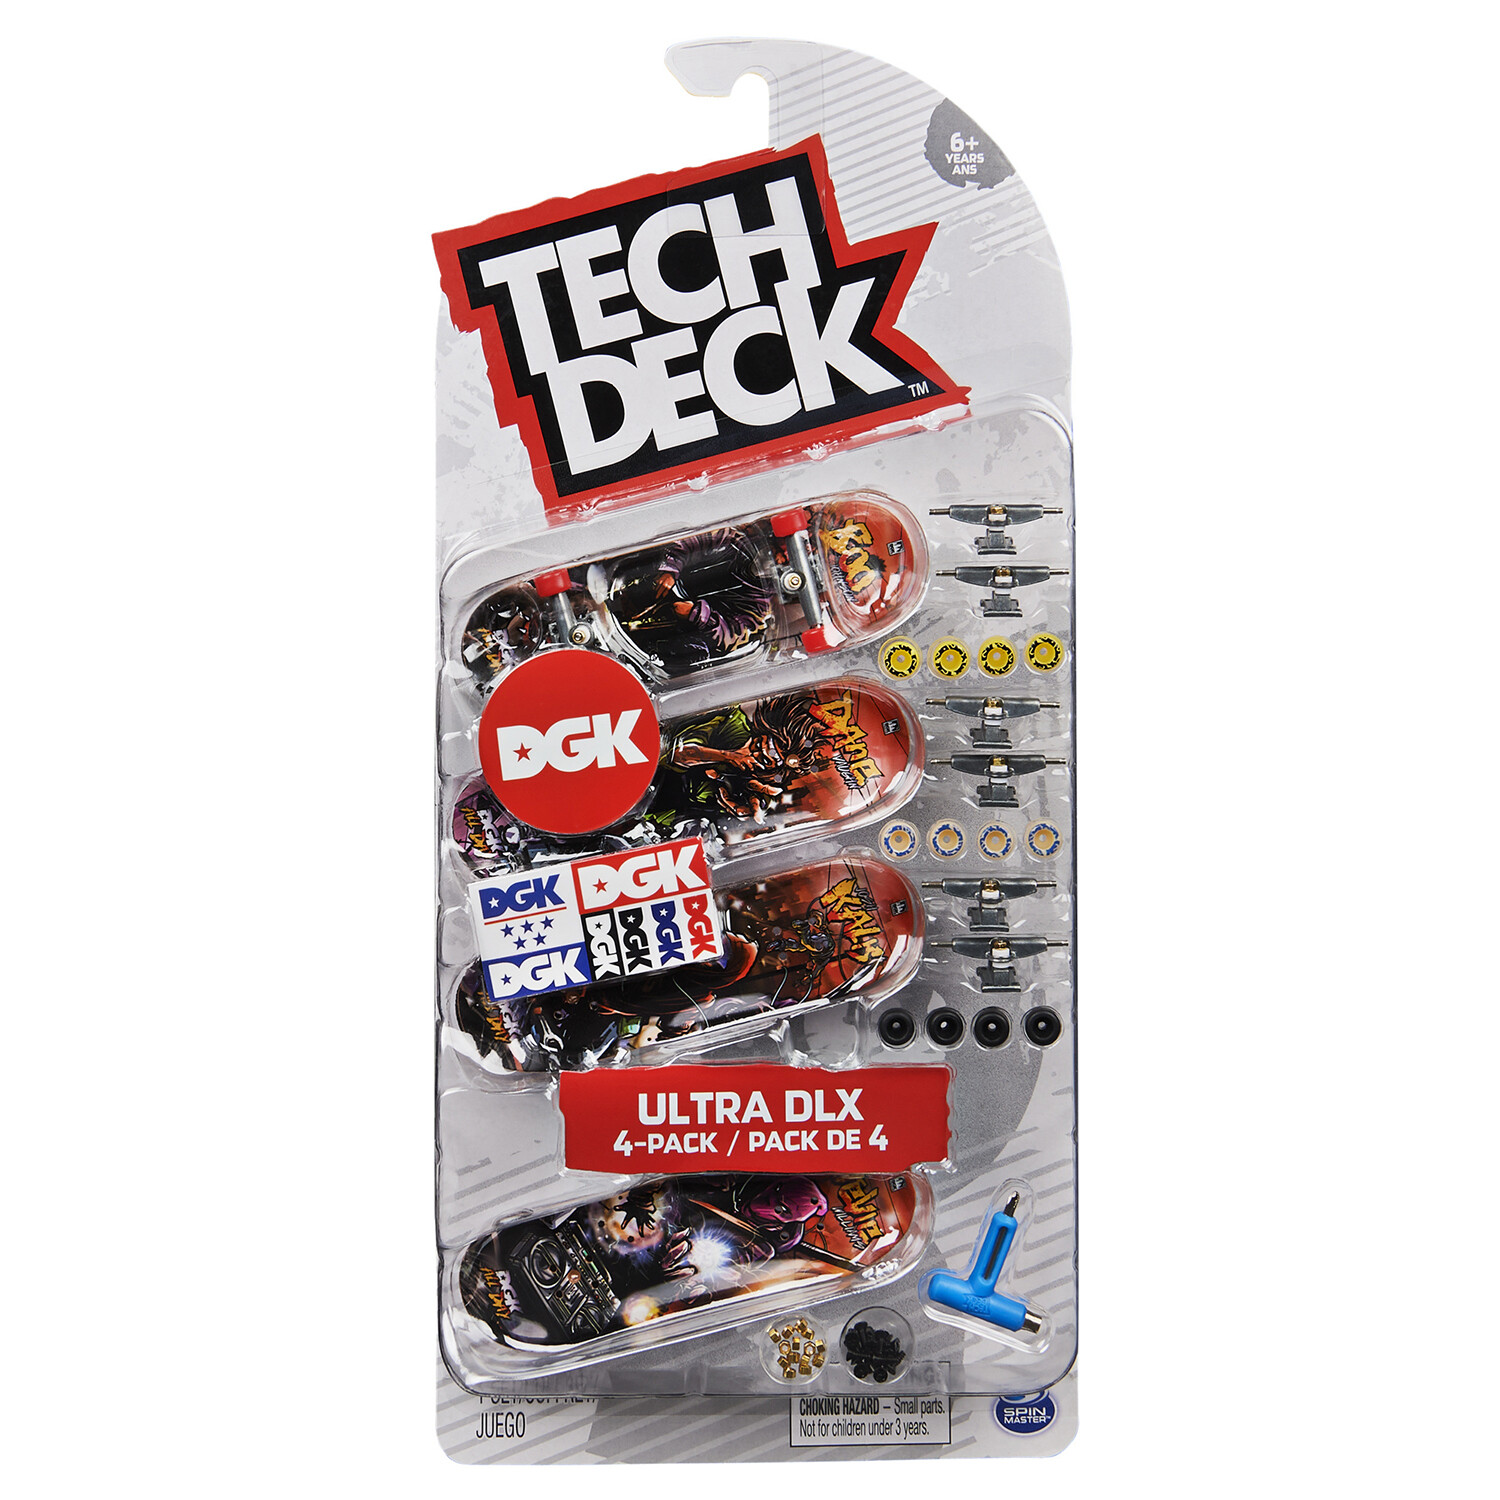 Tech Deck Ultra DLX Skateboards Figures in Assorted Style 4 Pack Image 3